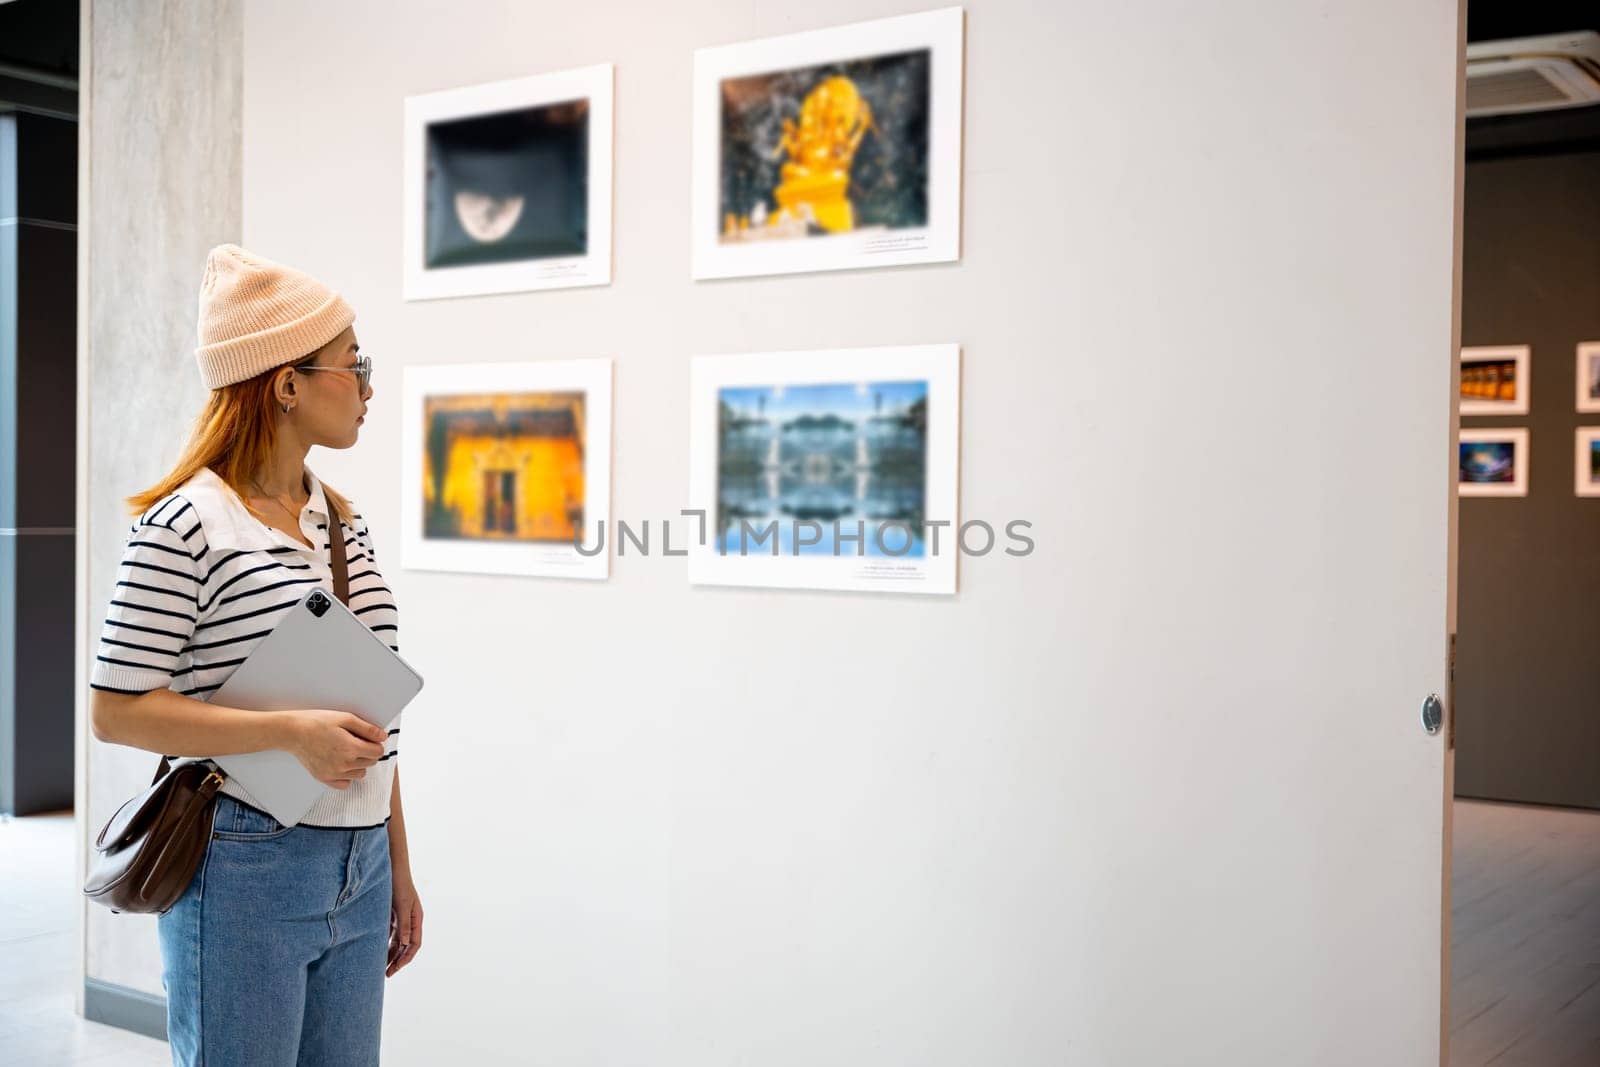 Young person at photo frame hold digital book leaning against at show exhibit artwork gallery by Sorapop